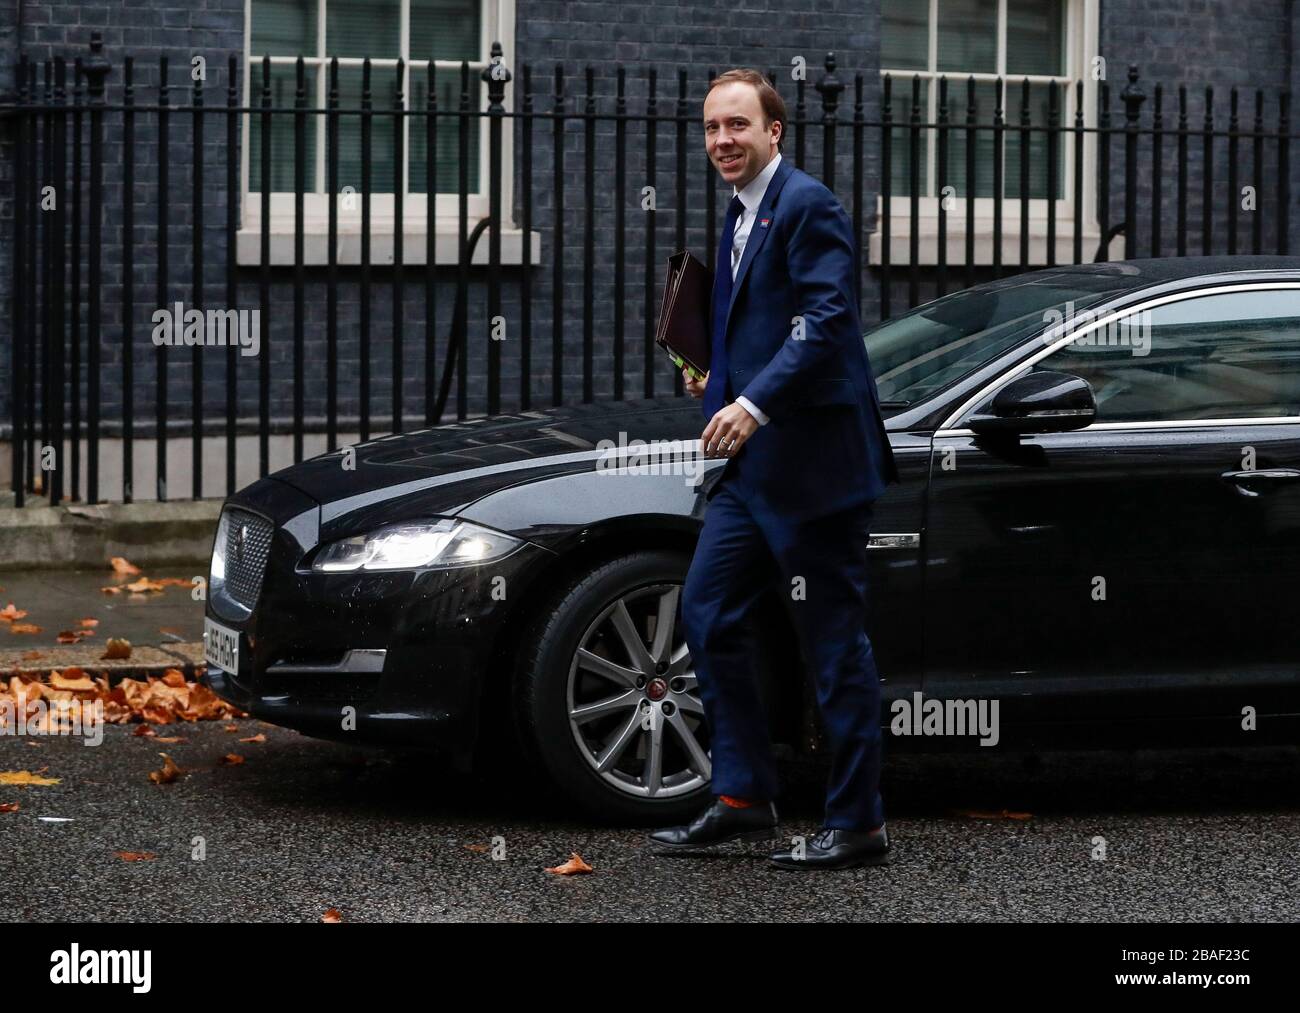 (200327) -- LONDON, March 27, 2020 (Xinhua) -- File photo taken on Nov. 20, 2018 shows British Health Secretary Matt Hancock arriving at 10 Downing Street for a cabinet meeting in London, Britain. Matt Hancock on Friday said he has tested positive for COVID-19 after Prime Minister Boris Johnson was confirmed to have the novel coronavirus. (Xinhua/Han Yan) Stock Photo